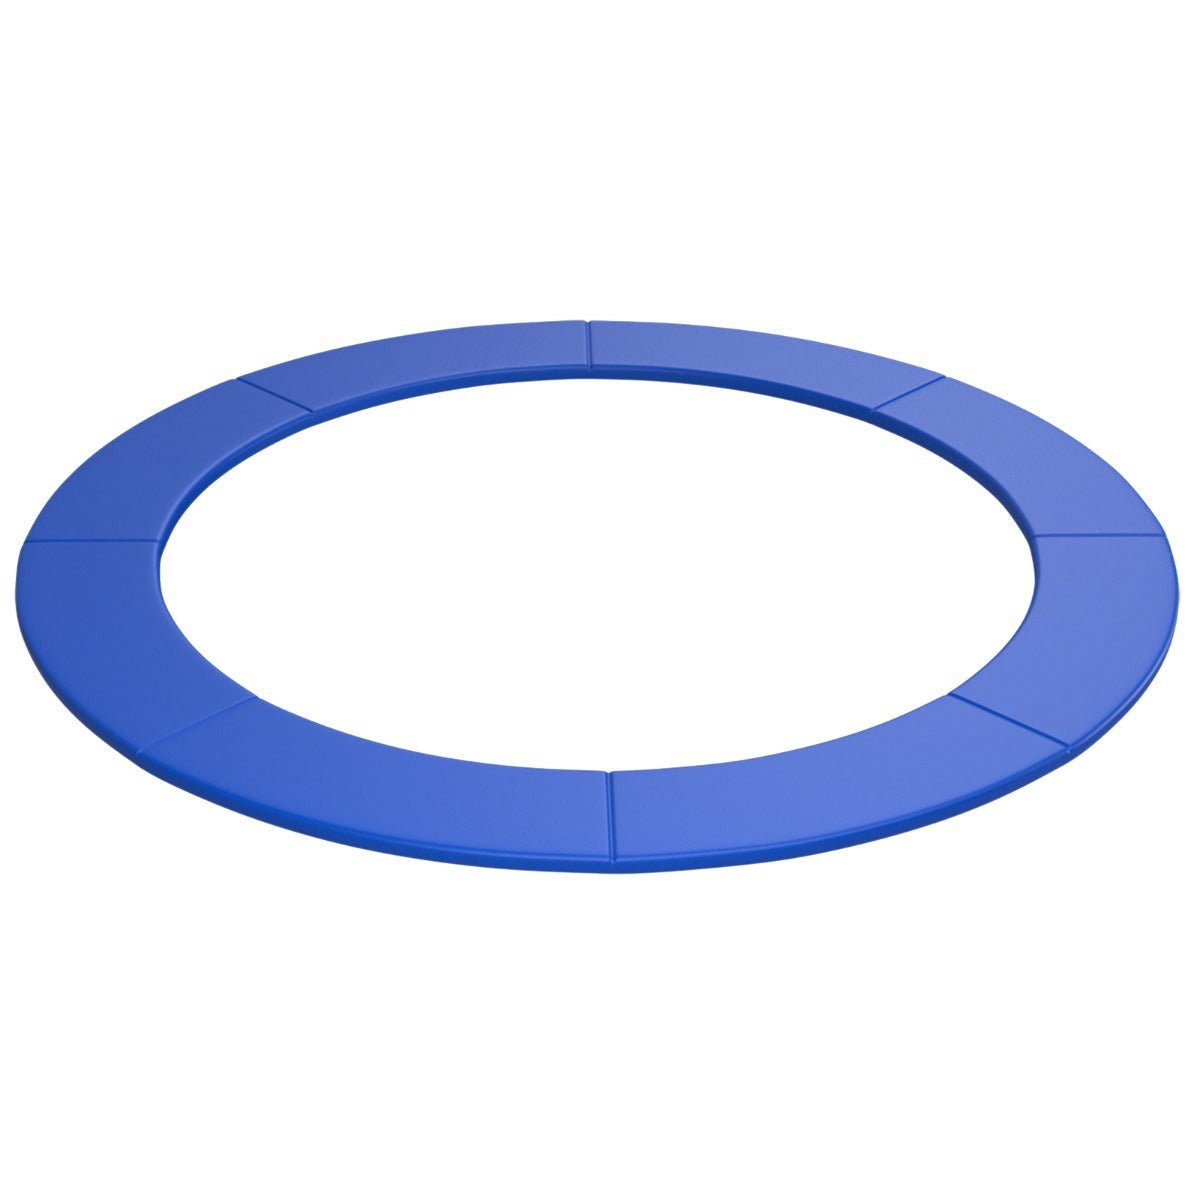 Safety Assurance: 3 Metre Navy Blue Trampoline Replacement Safety Pad, Waterproof & Durable